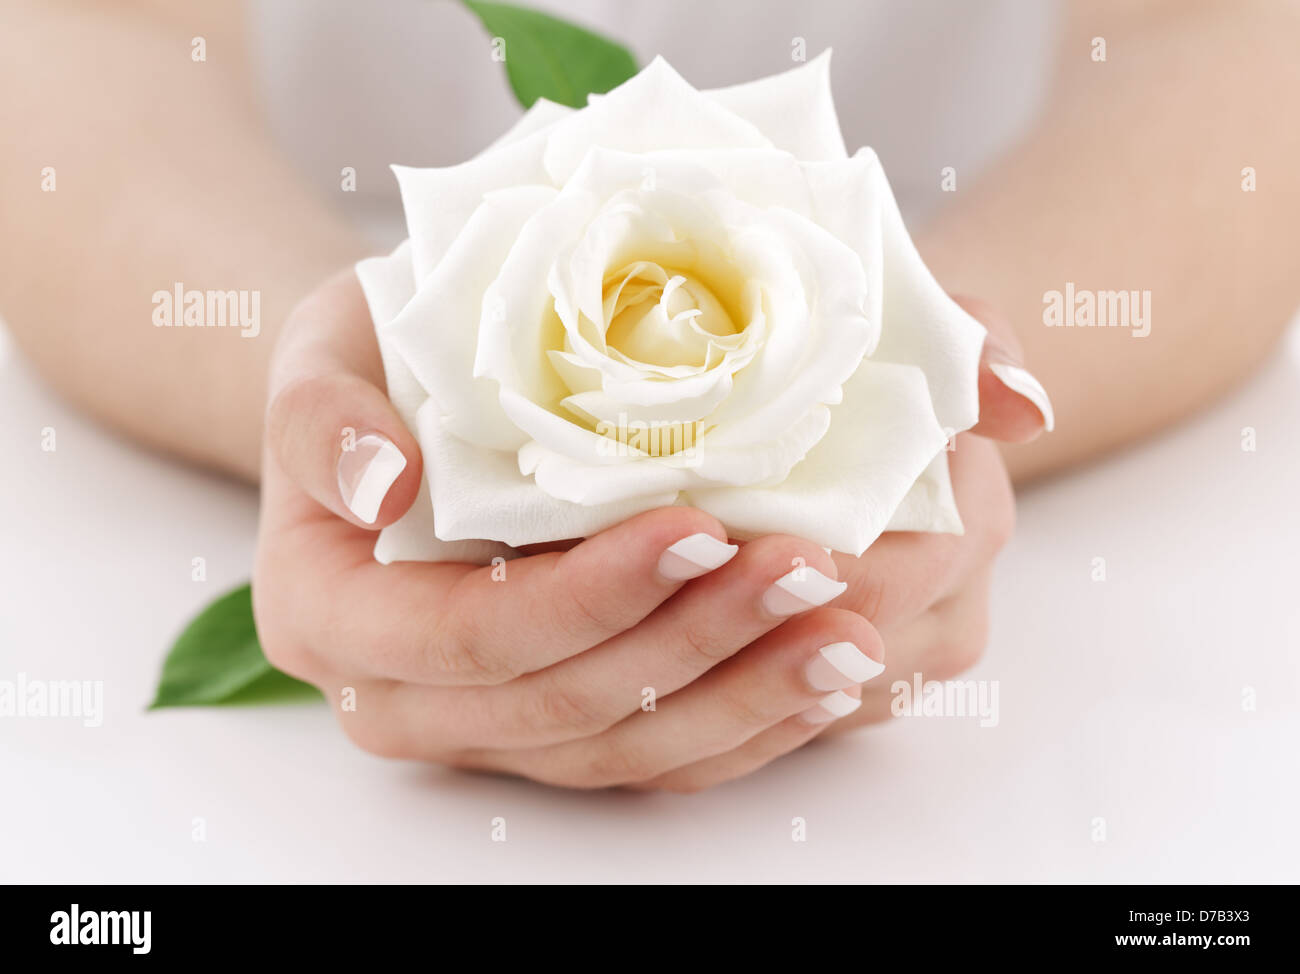 Woman's hands with white rose Stock Photo